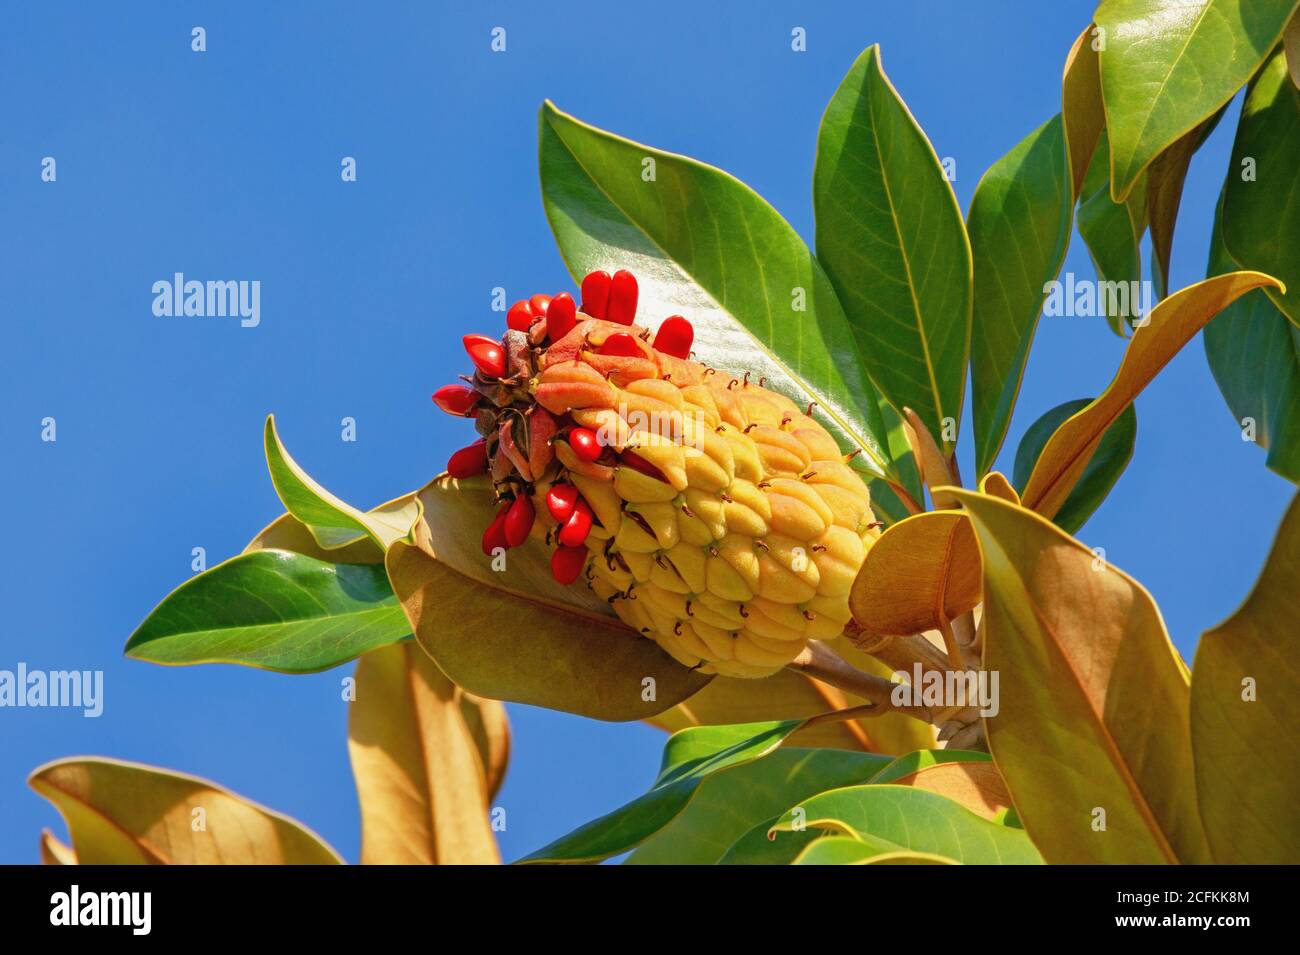 Autumn. Branch of a Magnolia grandiflora tree with leaves, fruit and seeds against blue sky Stock Photo